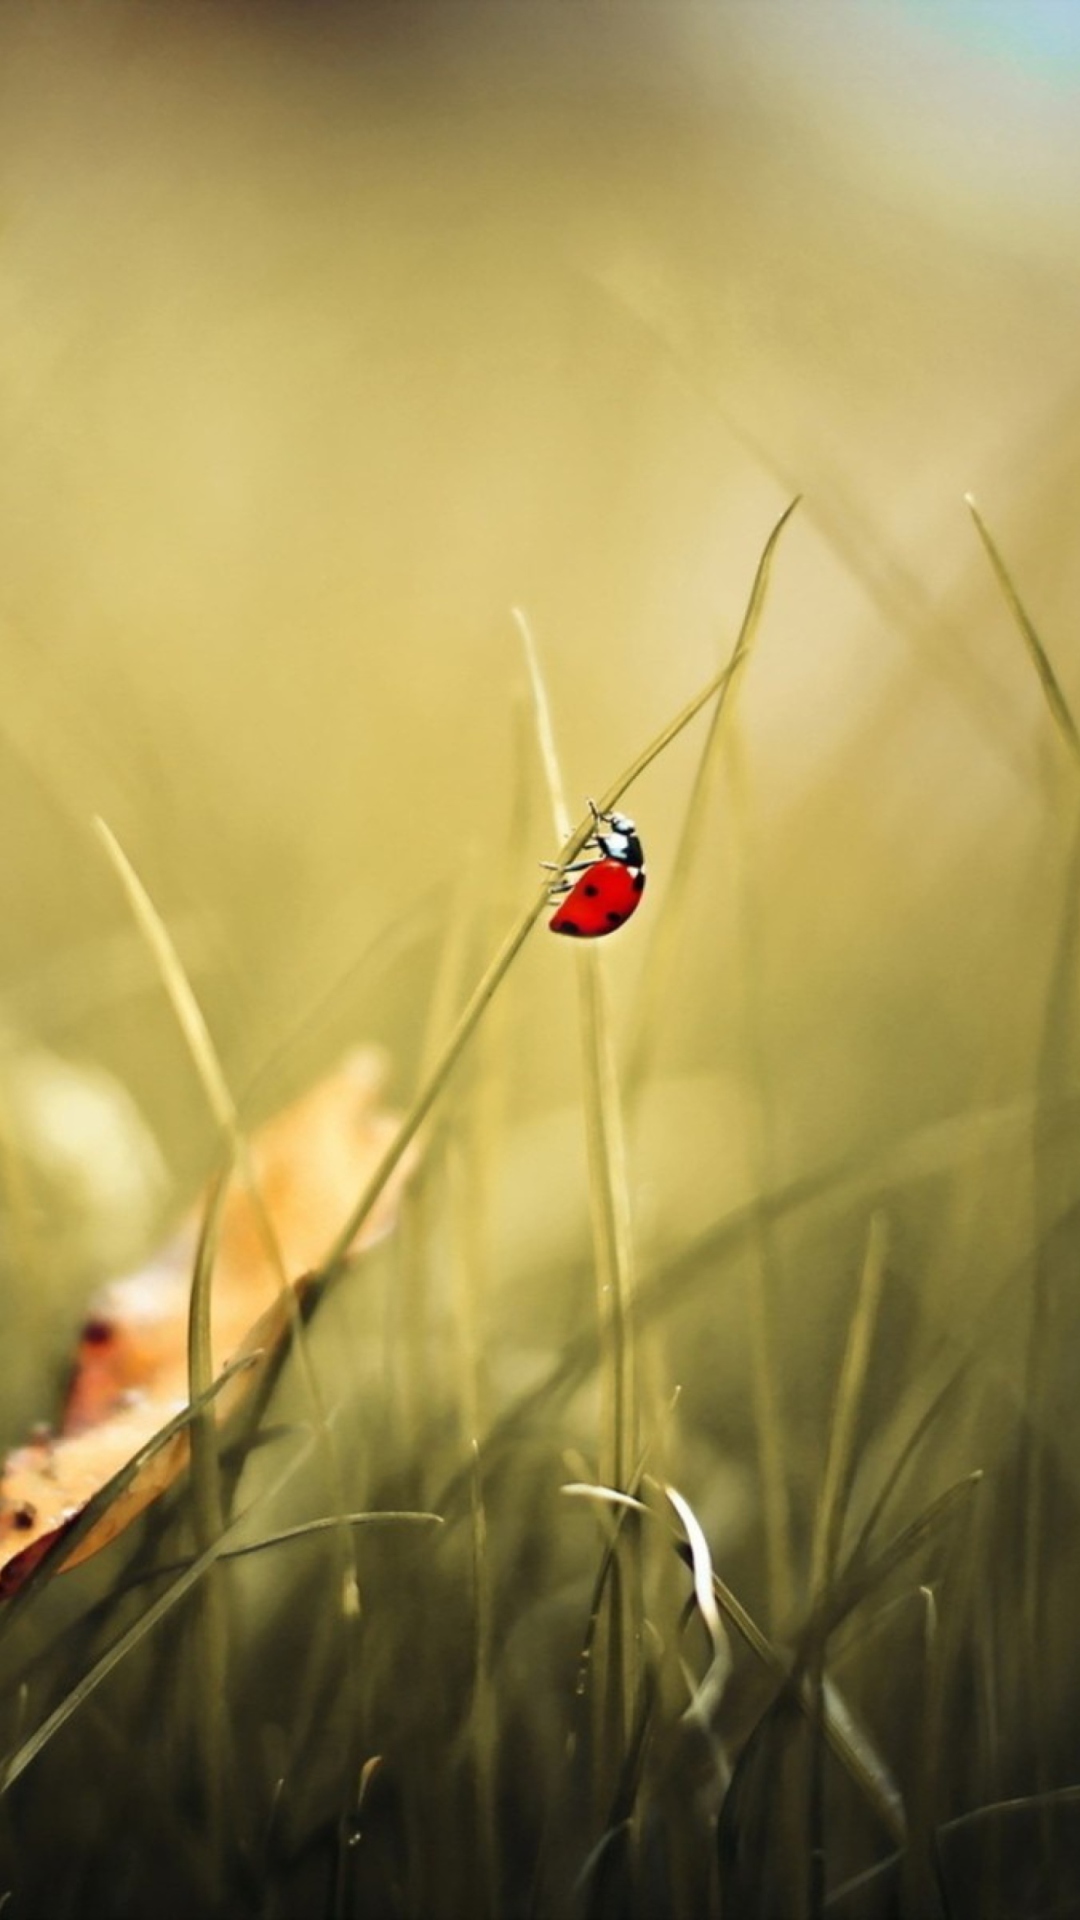 Lady Bug At Meadow wallpaper 1080x1920